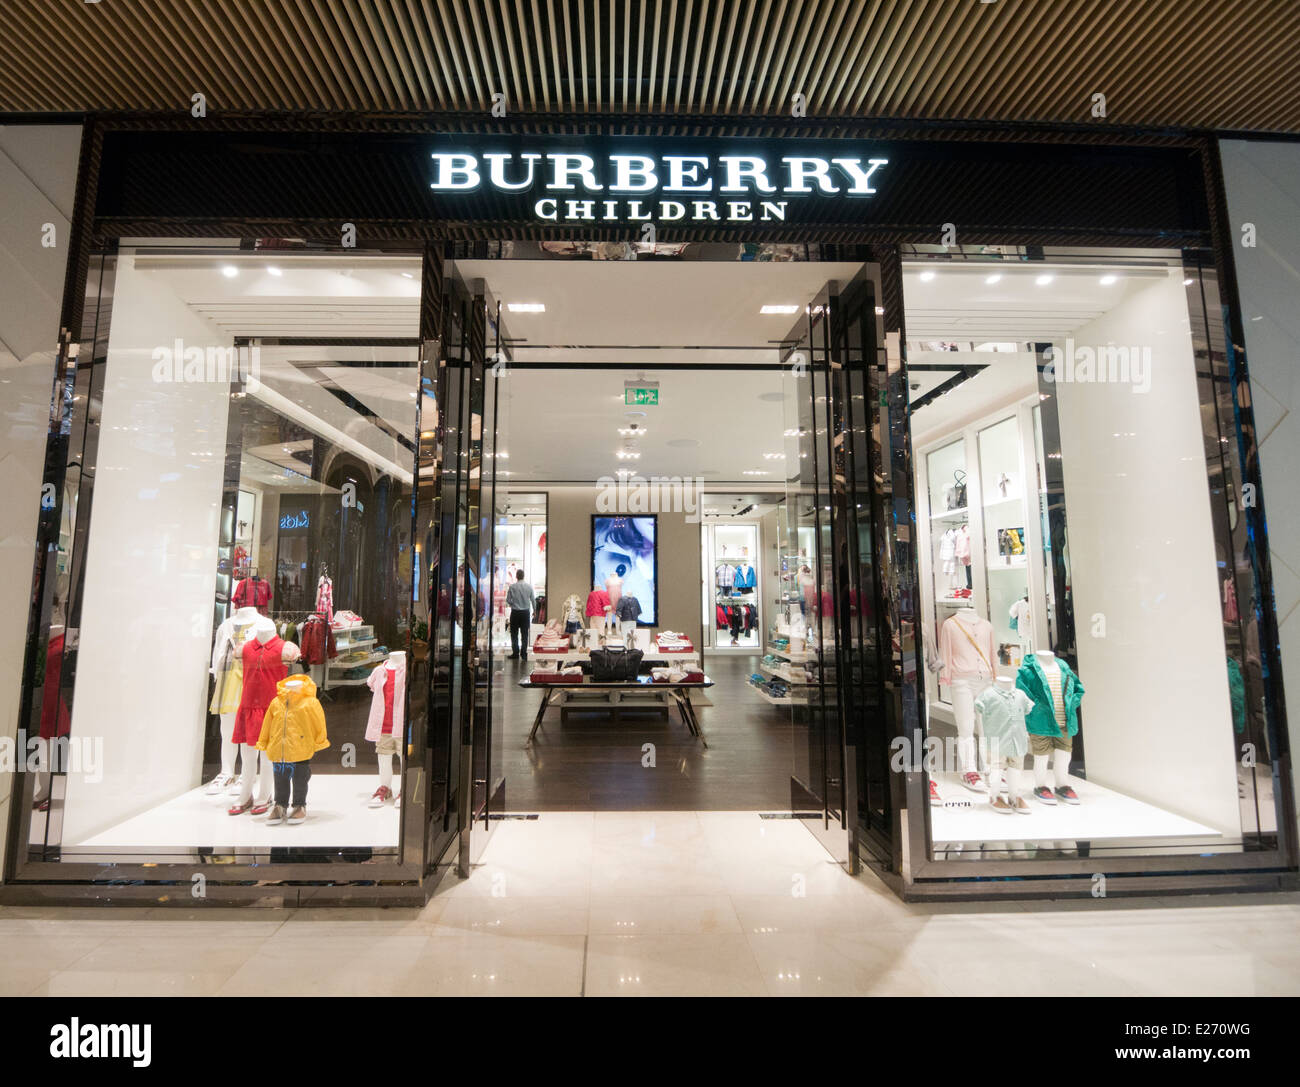 burberry childrens outlet